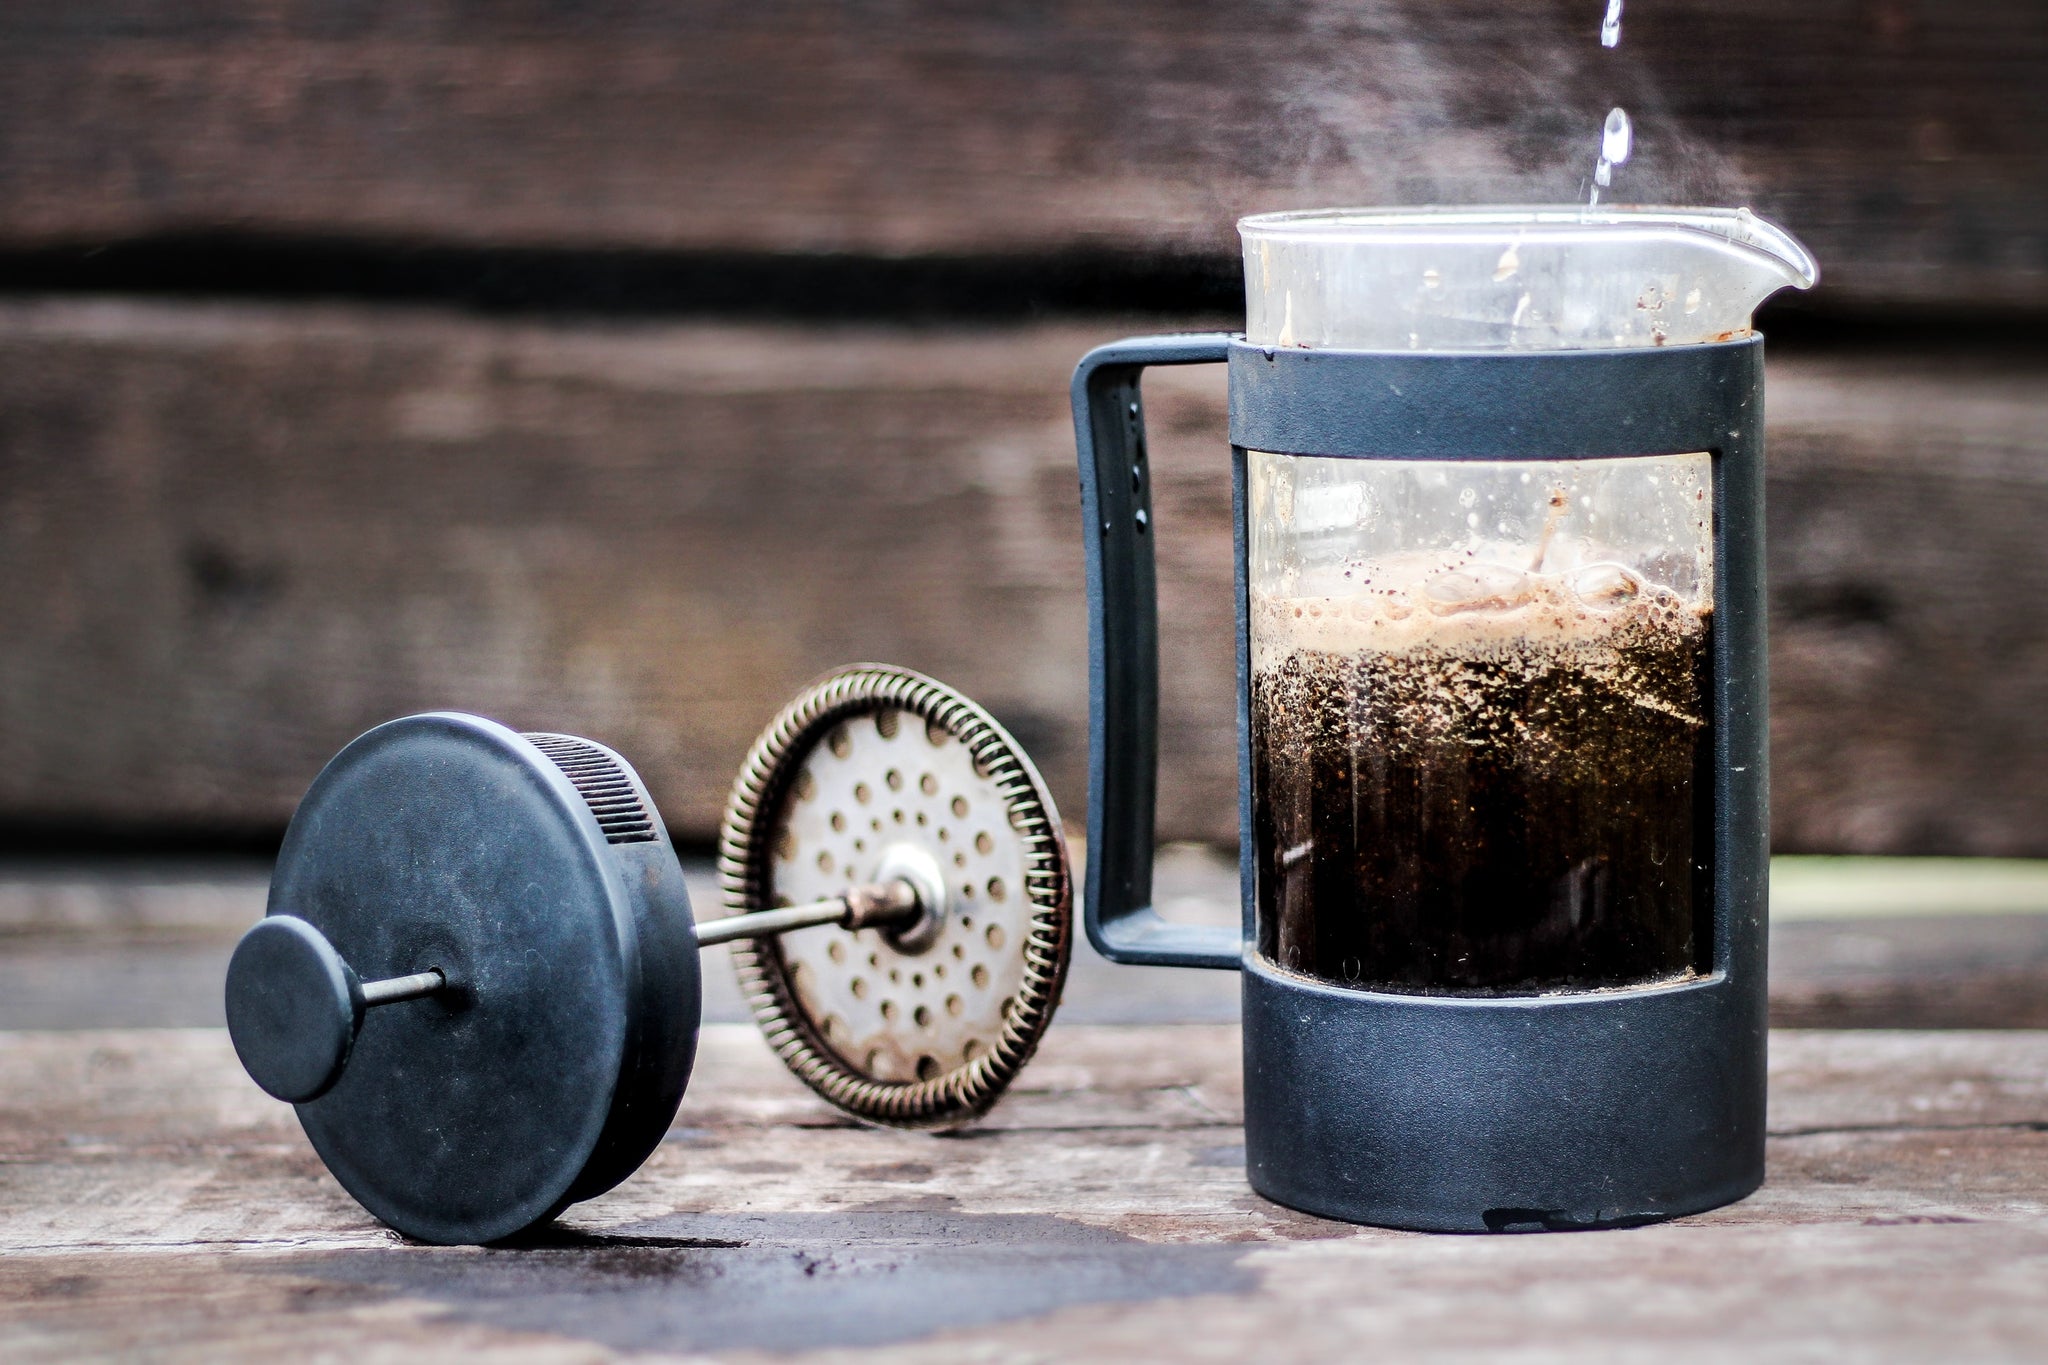 Press it, drip it, steep it? <br>A quick intro to coffee brewing methods